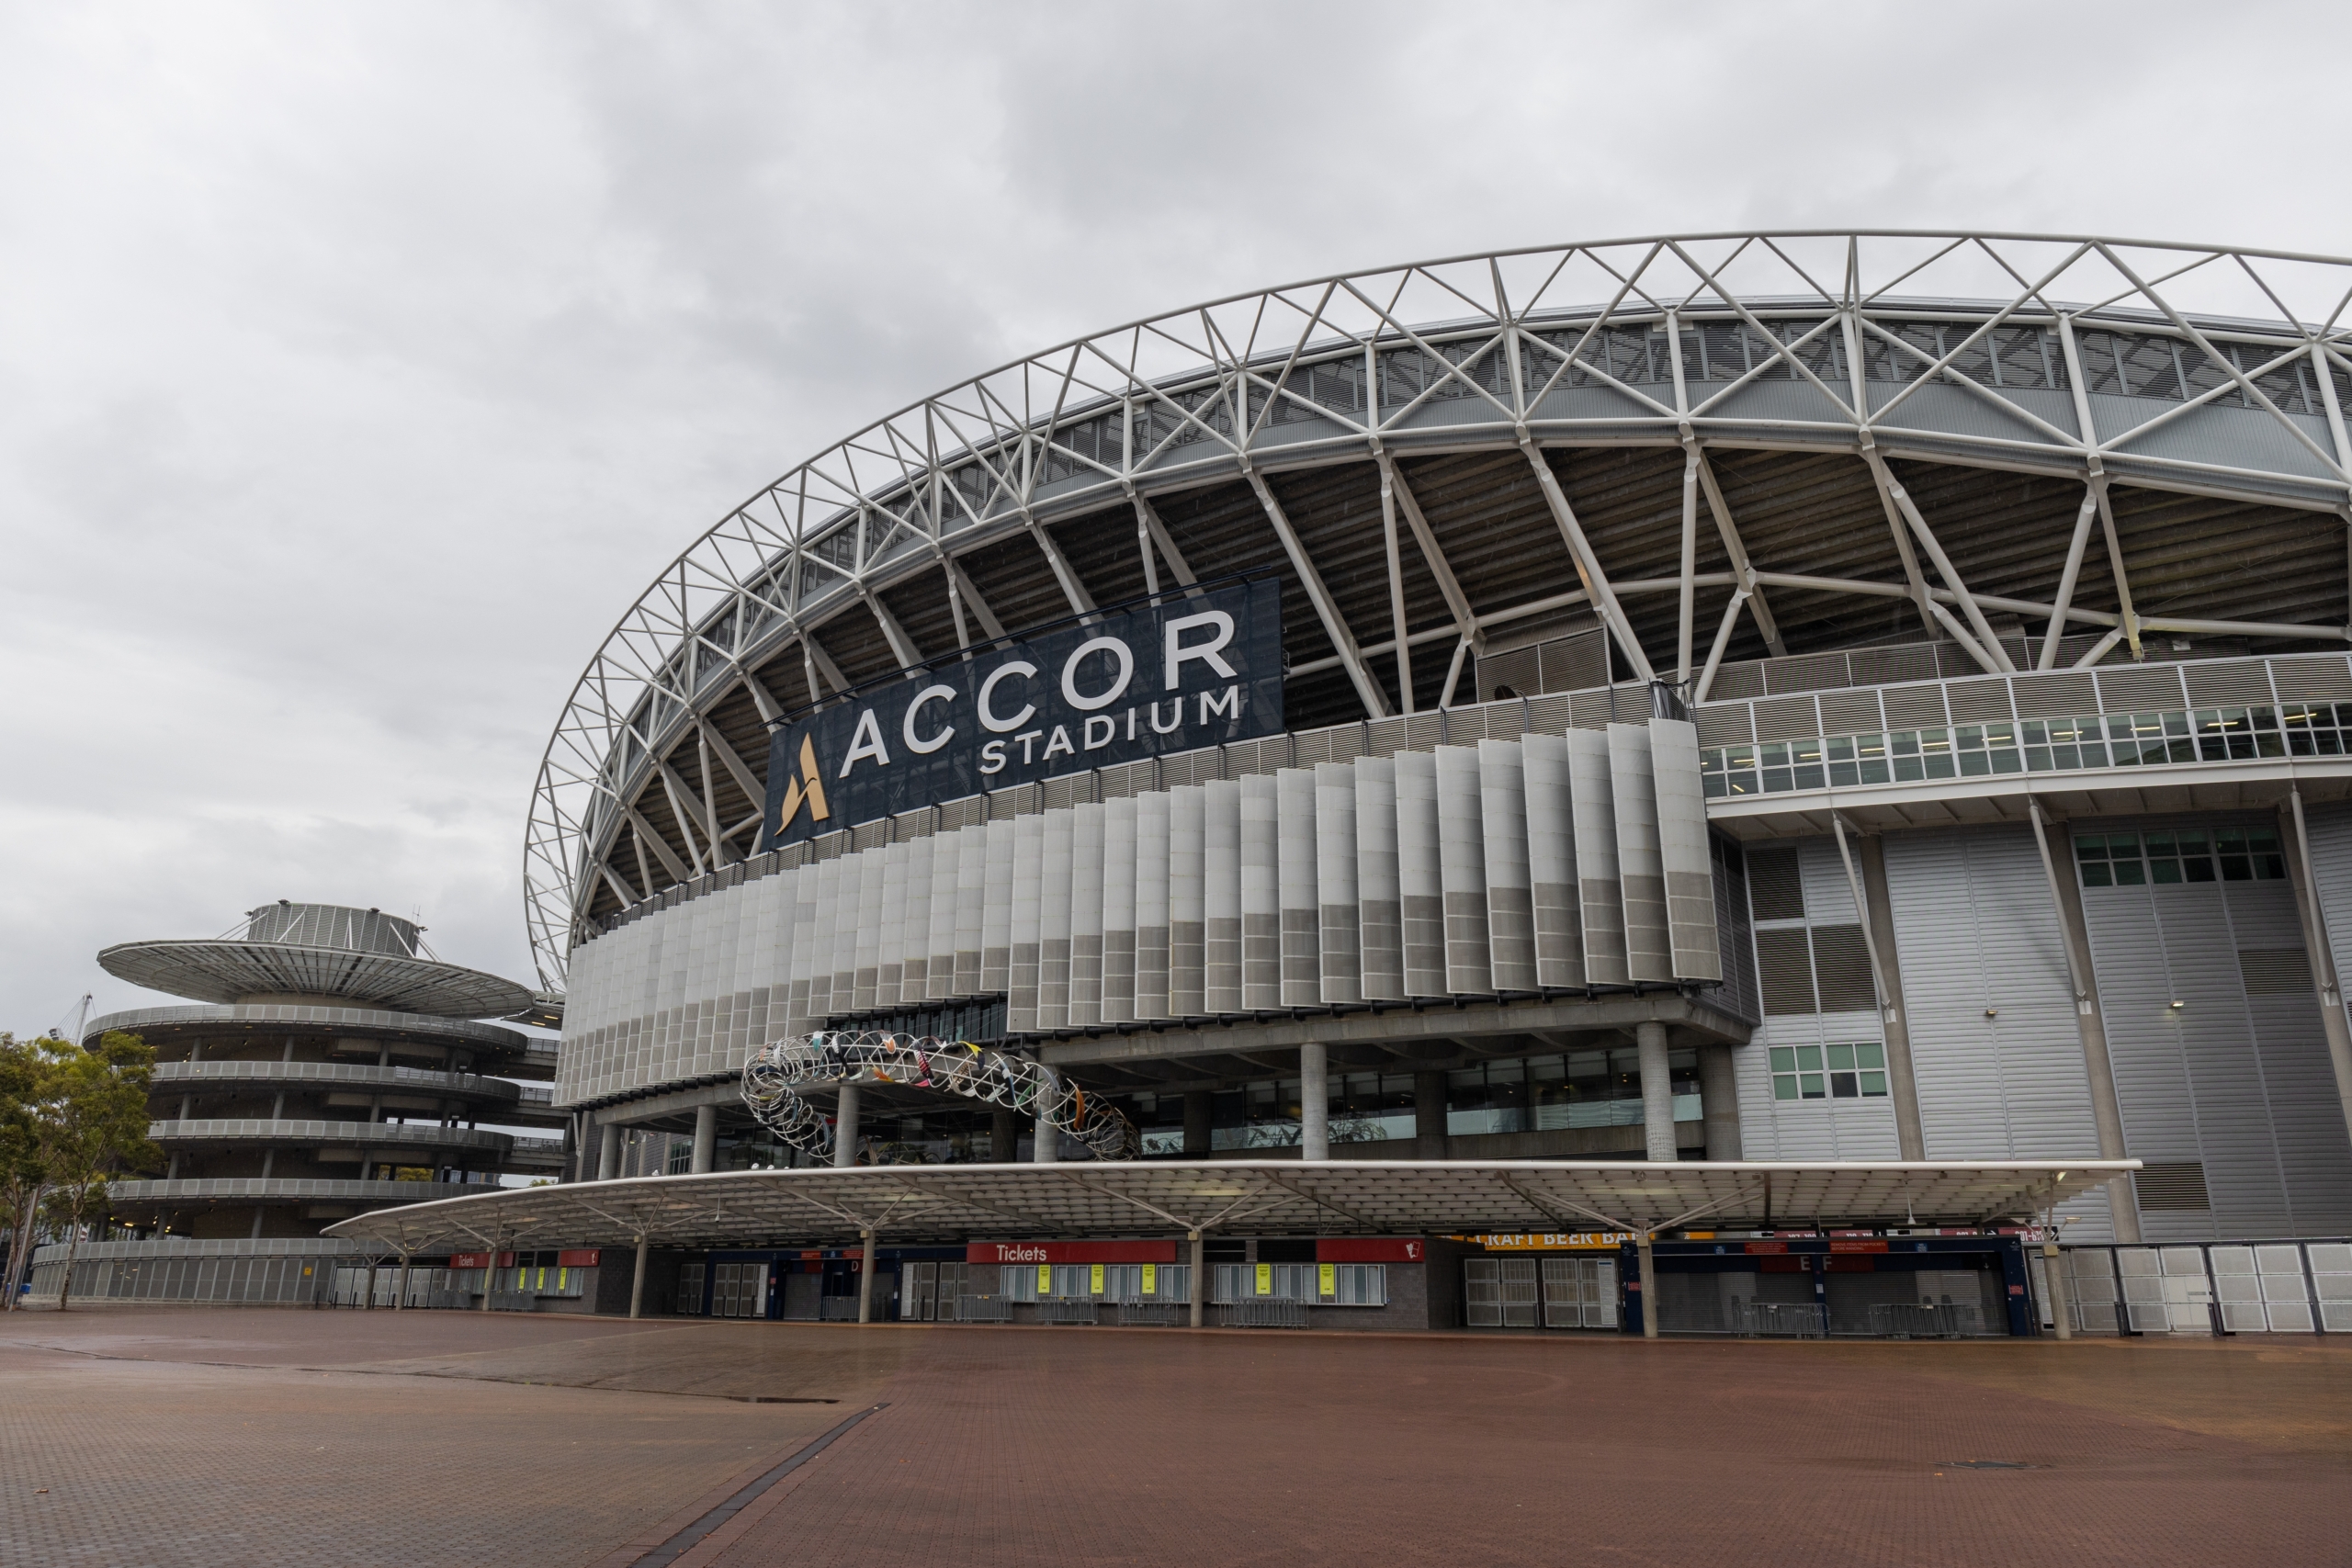 MatSing and Maser Australia Score a Connectivity Hat Trick at the Accor Stadium in Sydney